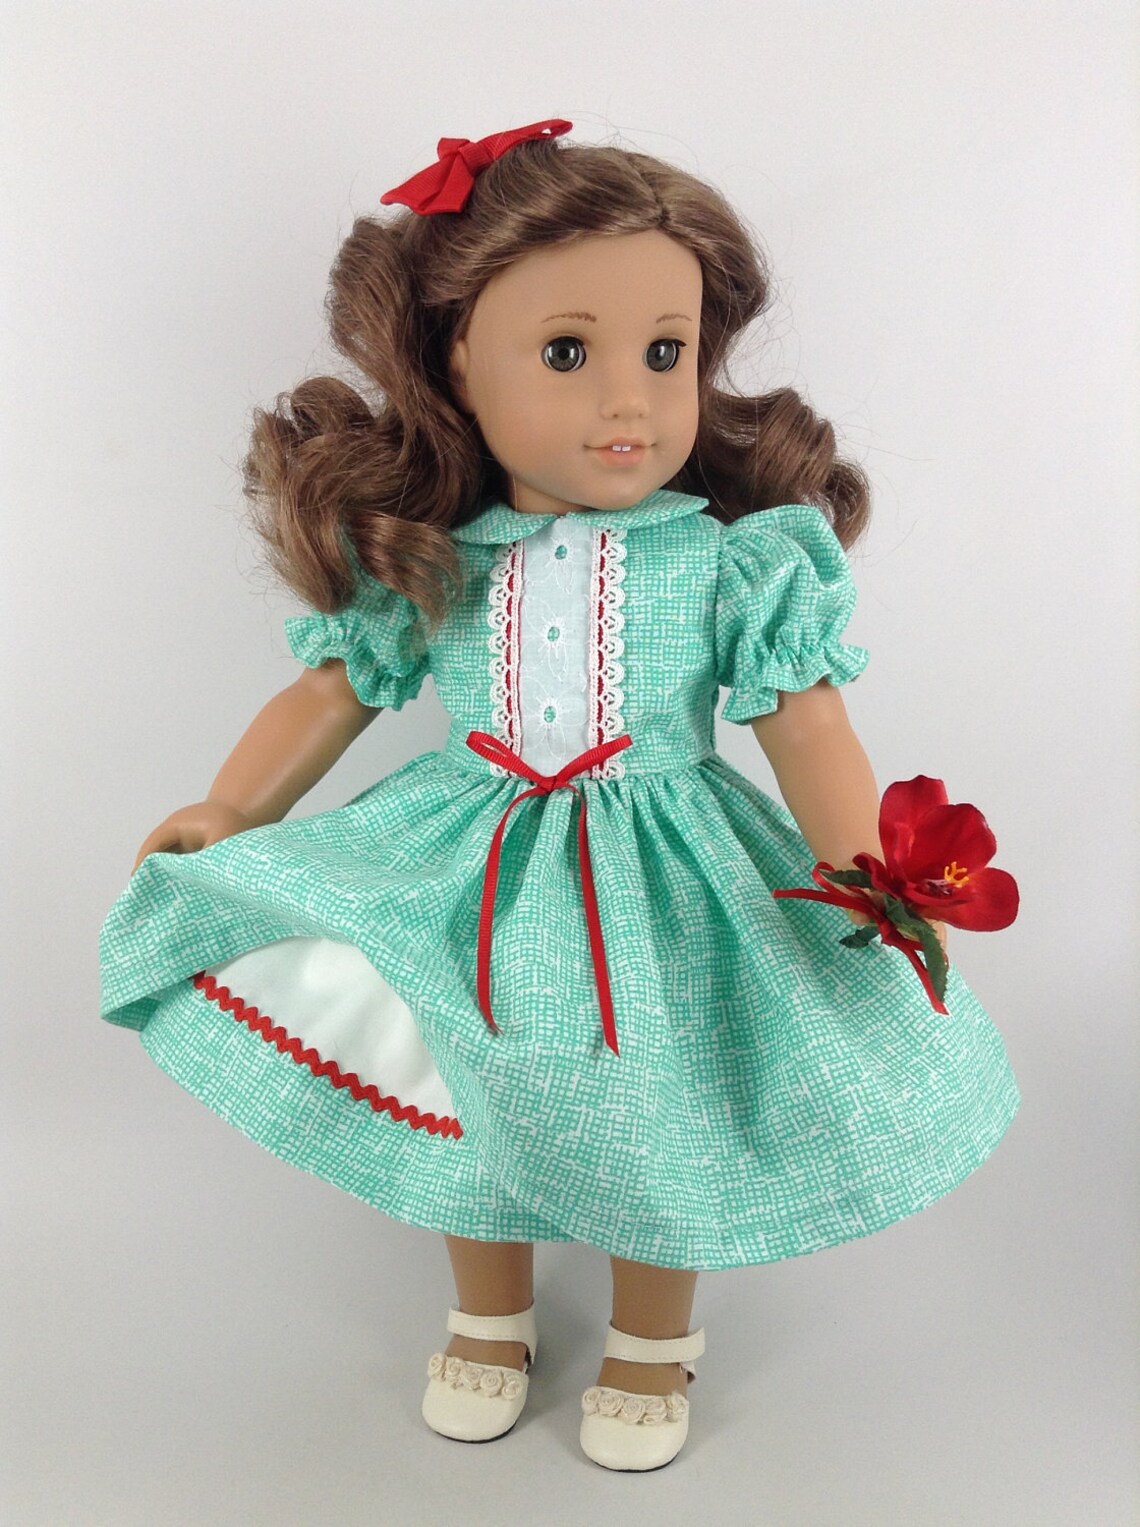 Pinafore/Apron Dress & Petticoat for American Girl 18-inch | Etsy